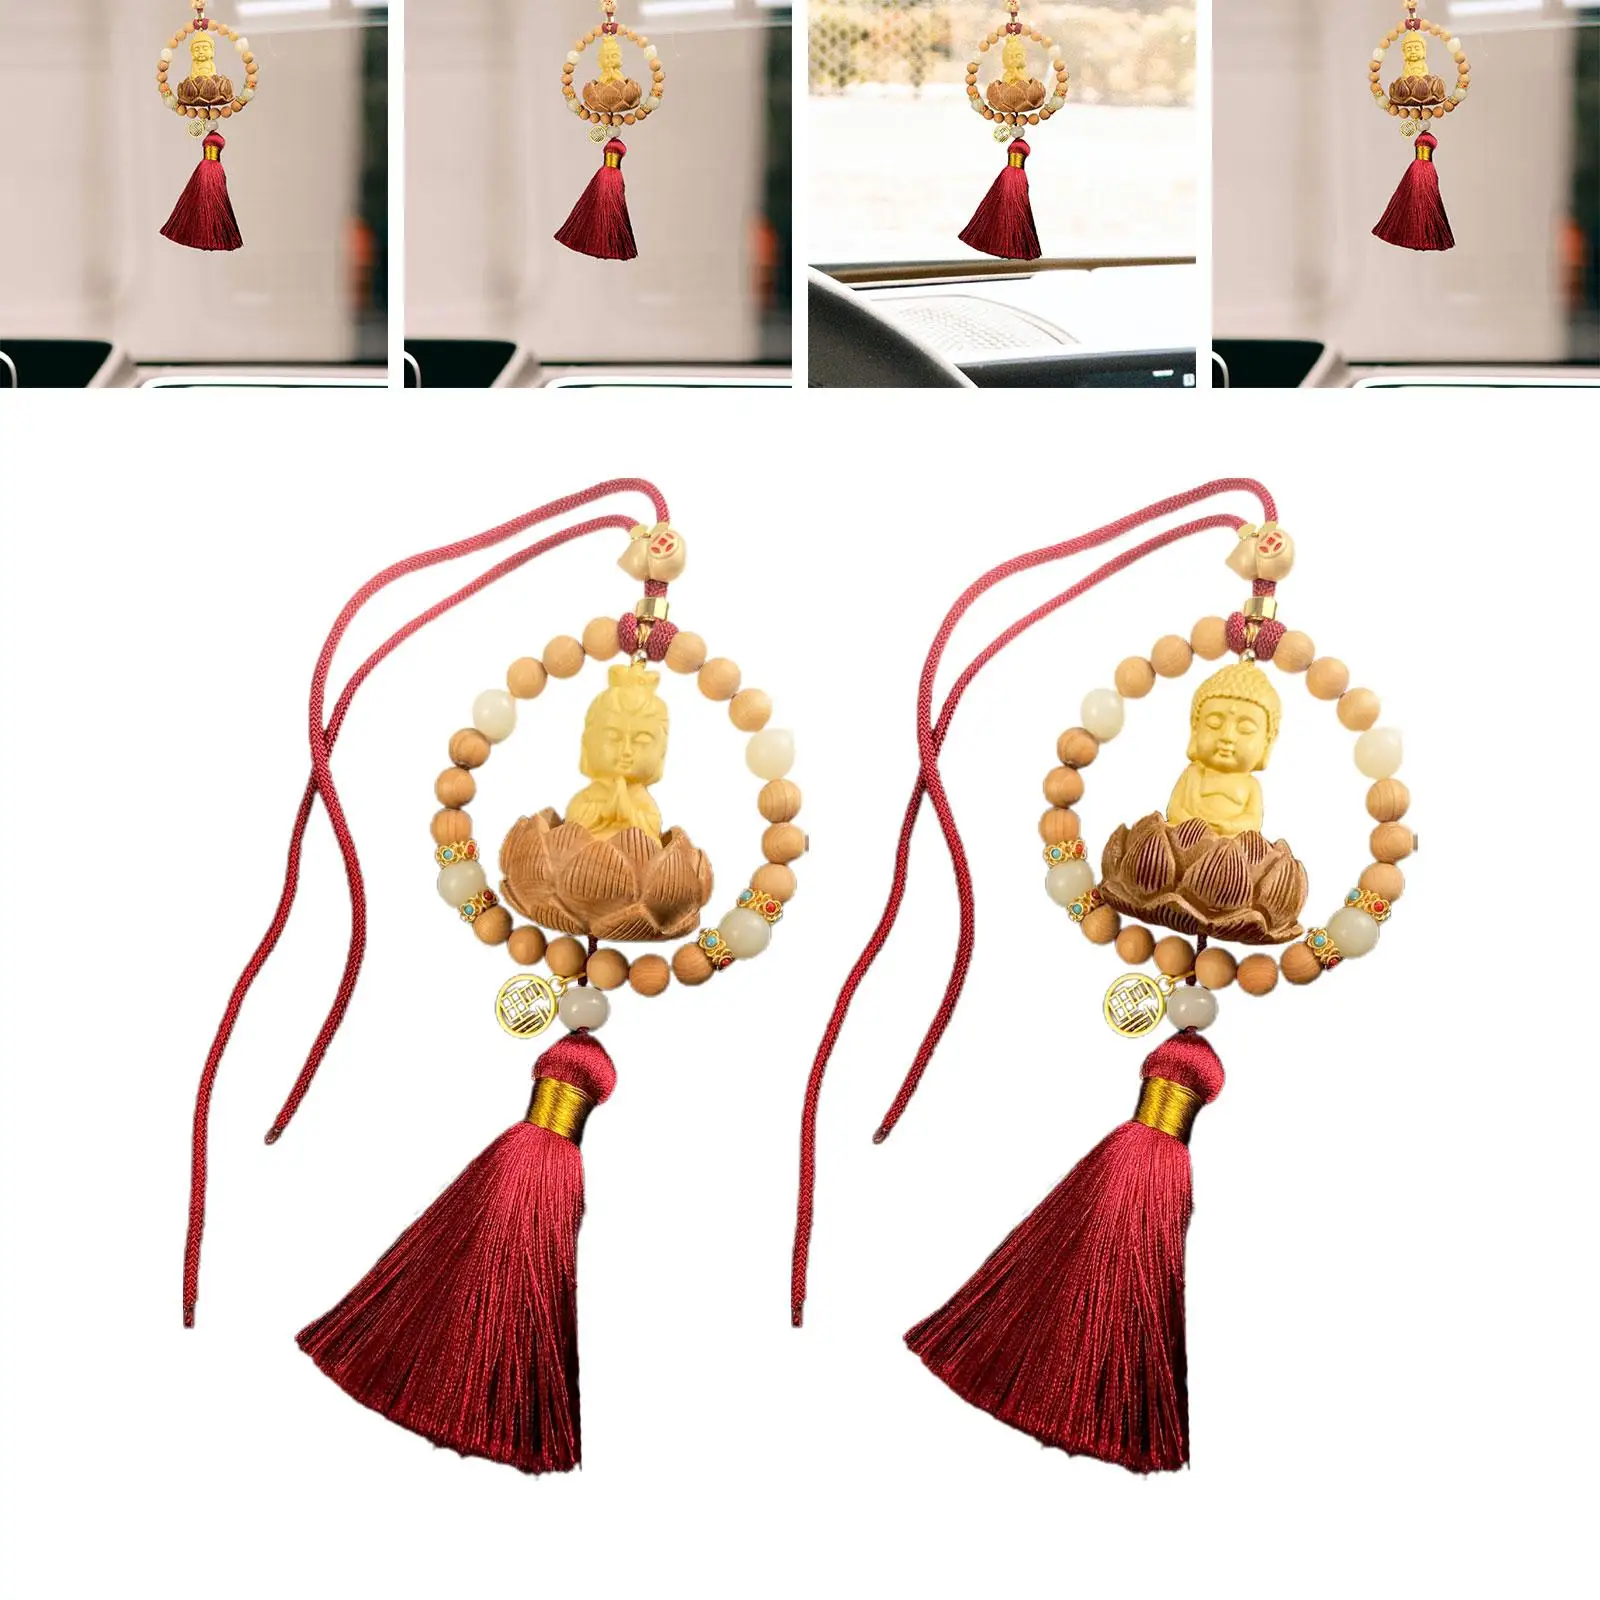 Buddha Small Figurine Gift Decorative Car Rearview Mirror Charm Pendant Auto Interior Decoration for Wall House Door Window